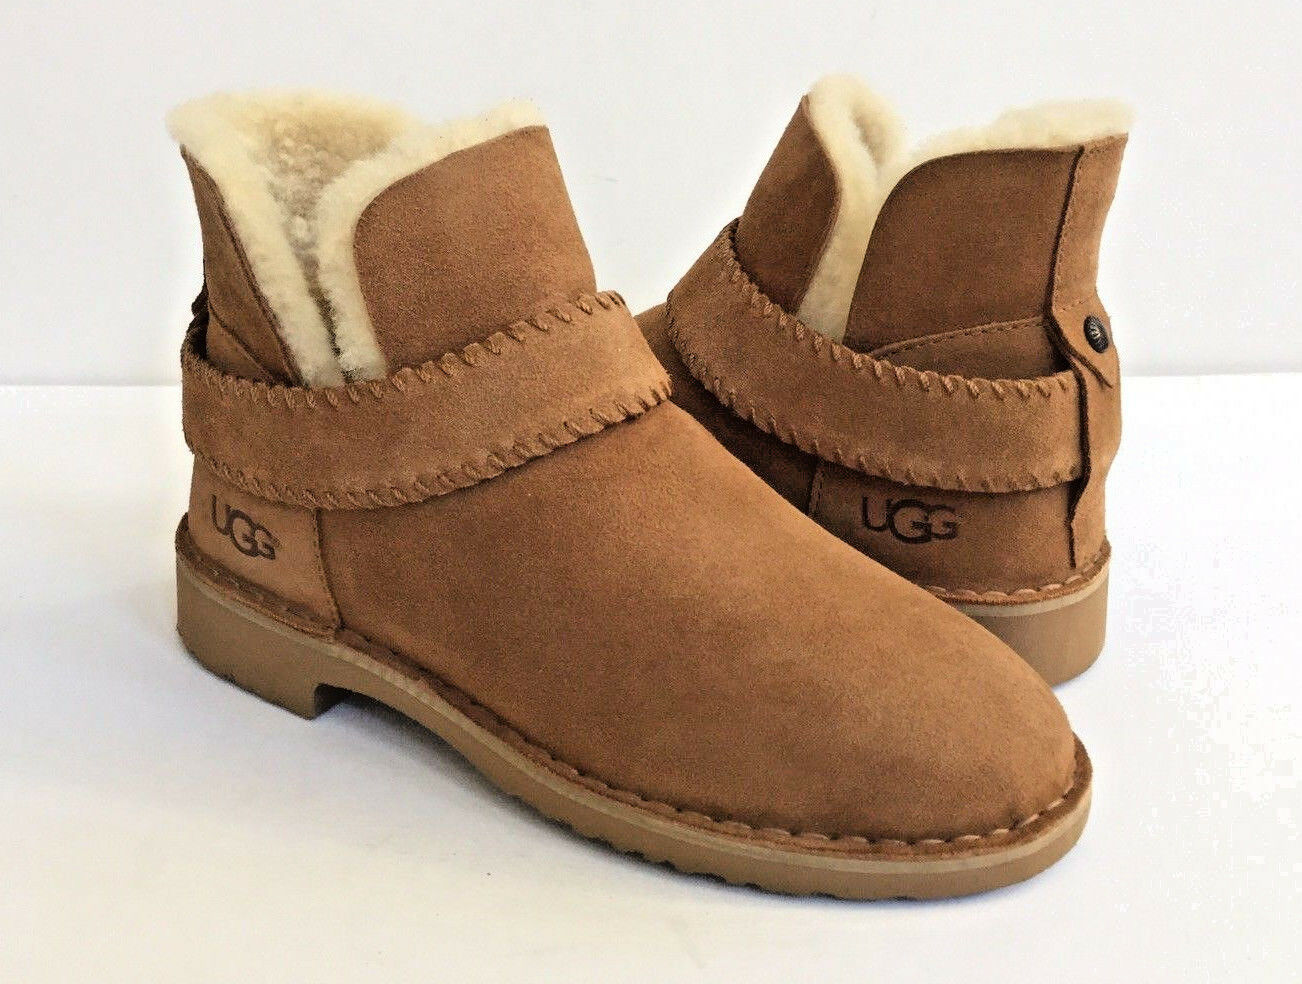 mckay ugg boots size 8